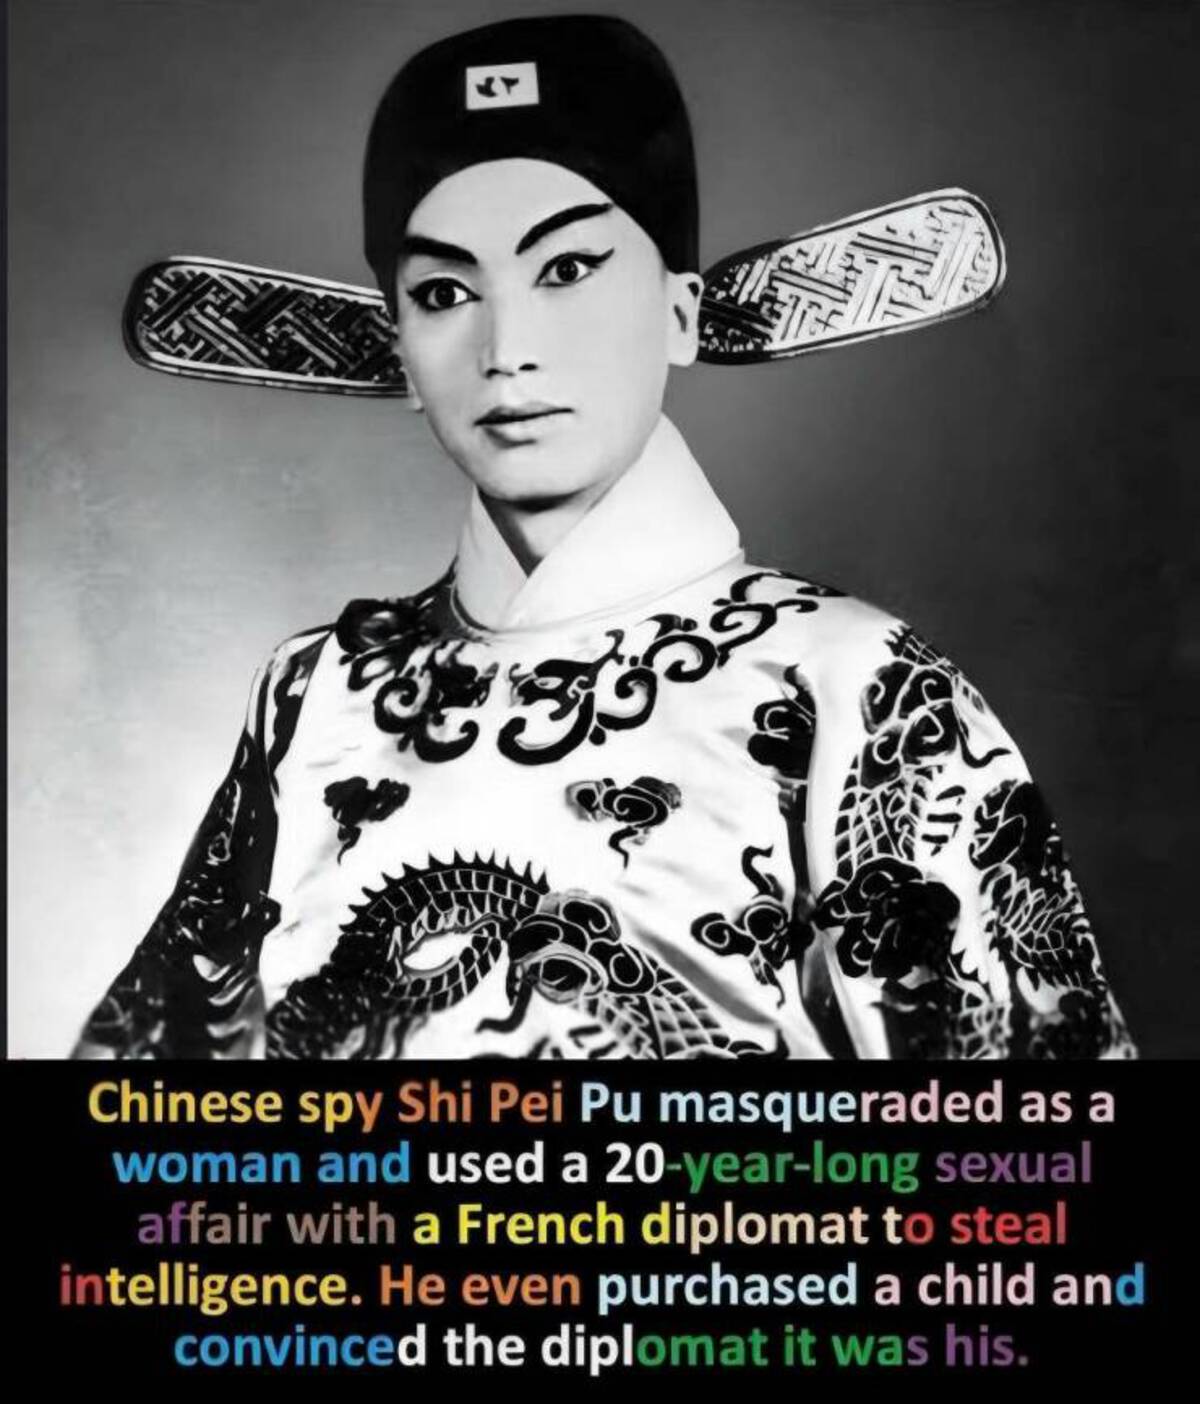 shi pei pu - Chinese spy Shi Pei Pu masqueraded as a woman and used a 20yearlong sexual affair with a French diplomat to steal intelligence. He even purchased a child and convinced the diplomat it was his.